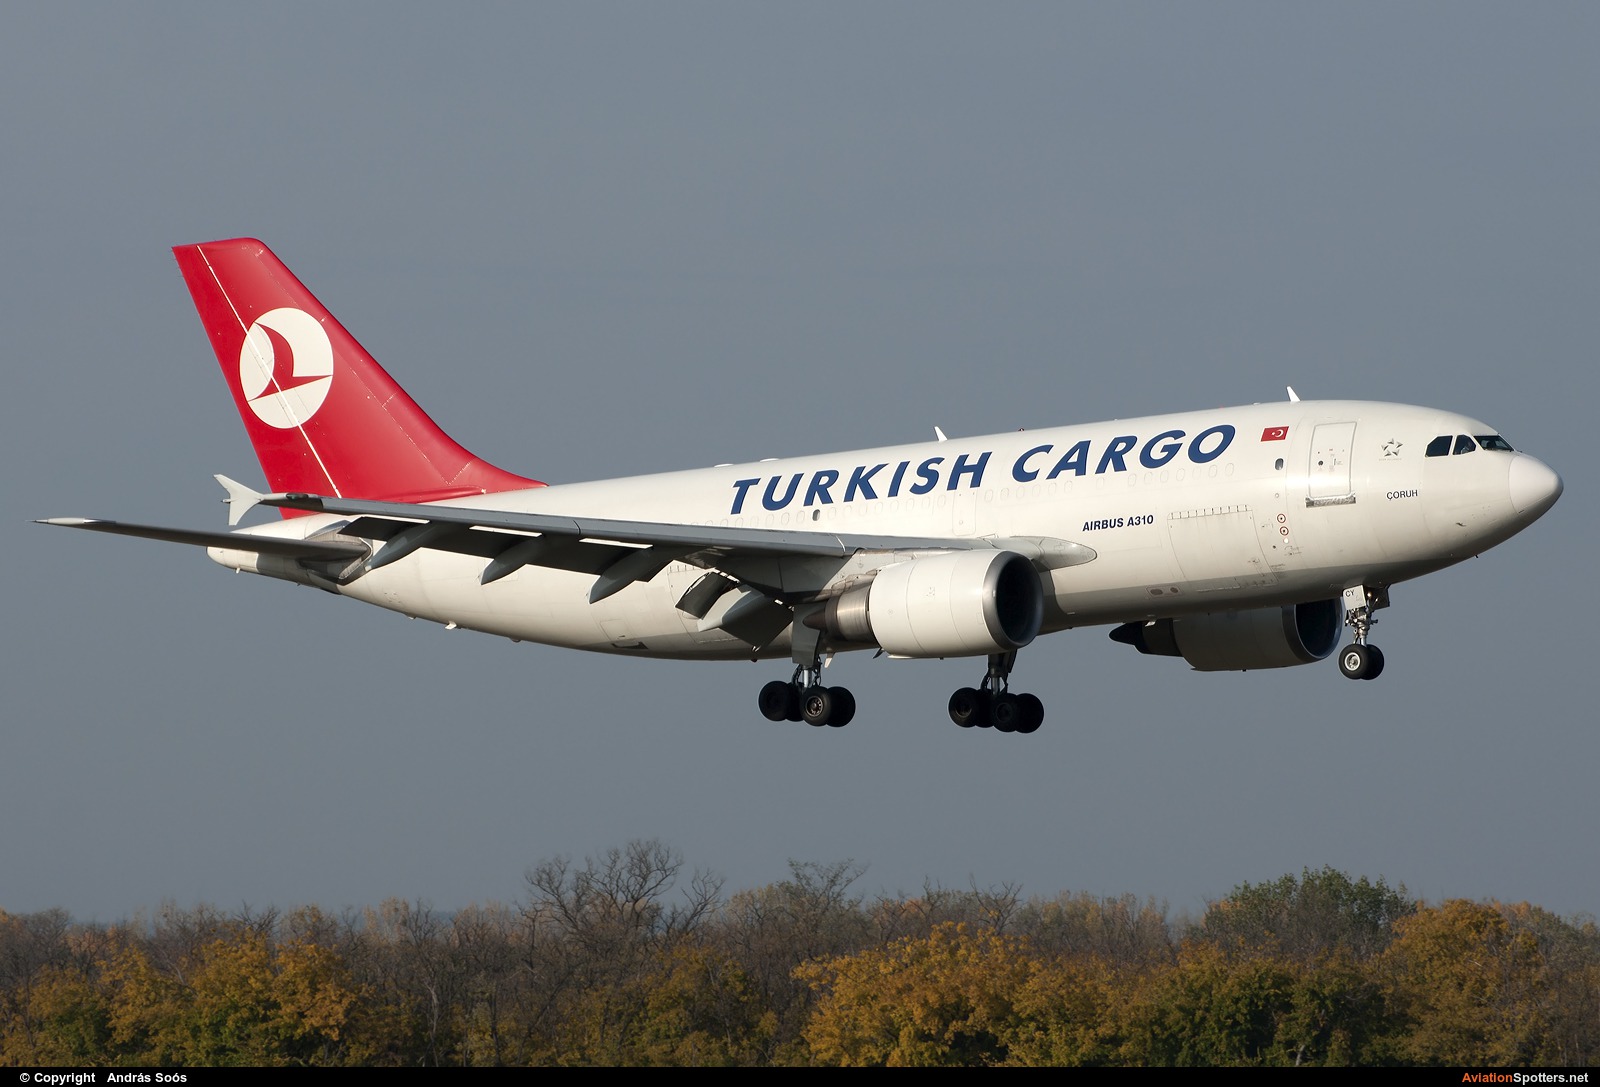 Turkish Airlines Cargo  -  A310F  (TC-JCY) By András Soós (sas1965)